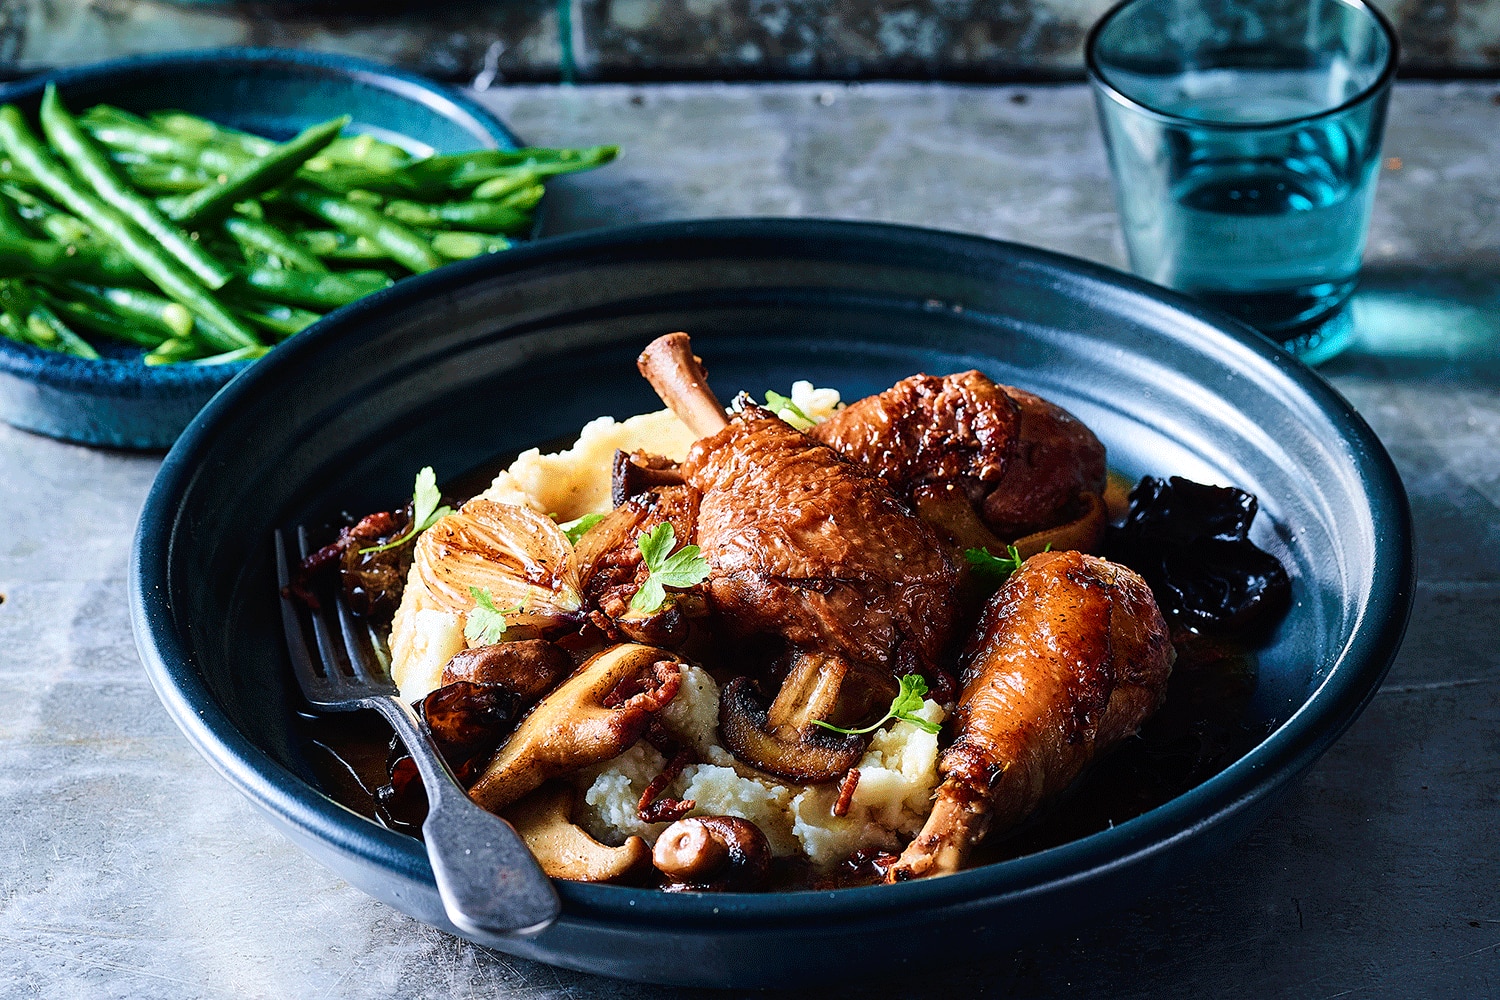 🍴 If You’ve Tried 18/27 of These Foods, You’re a Sophisticated Eater Coq Au Vin